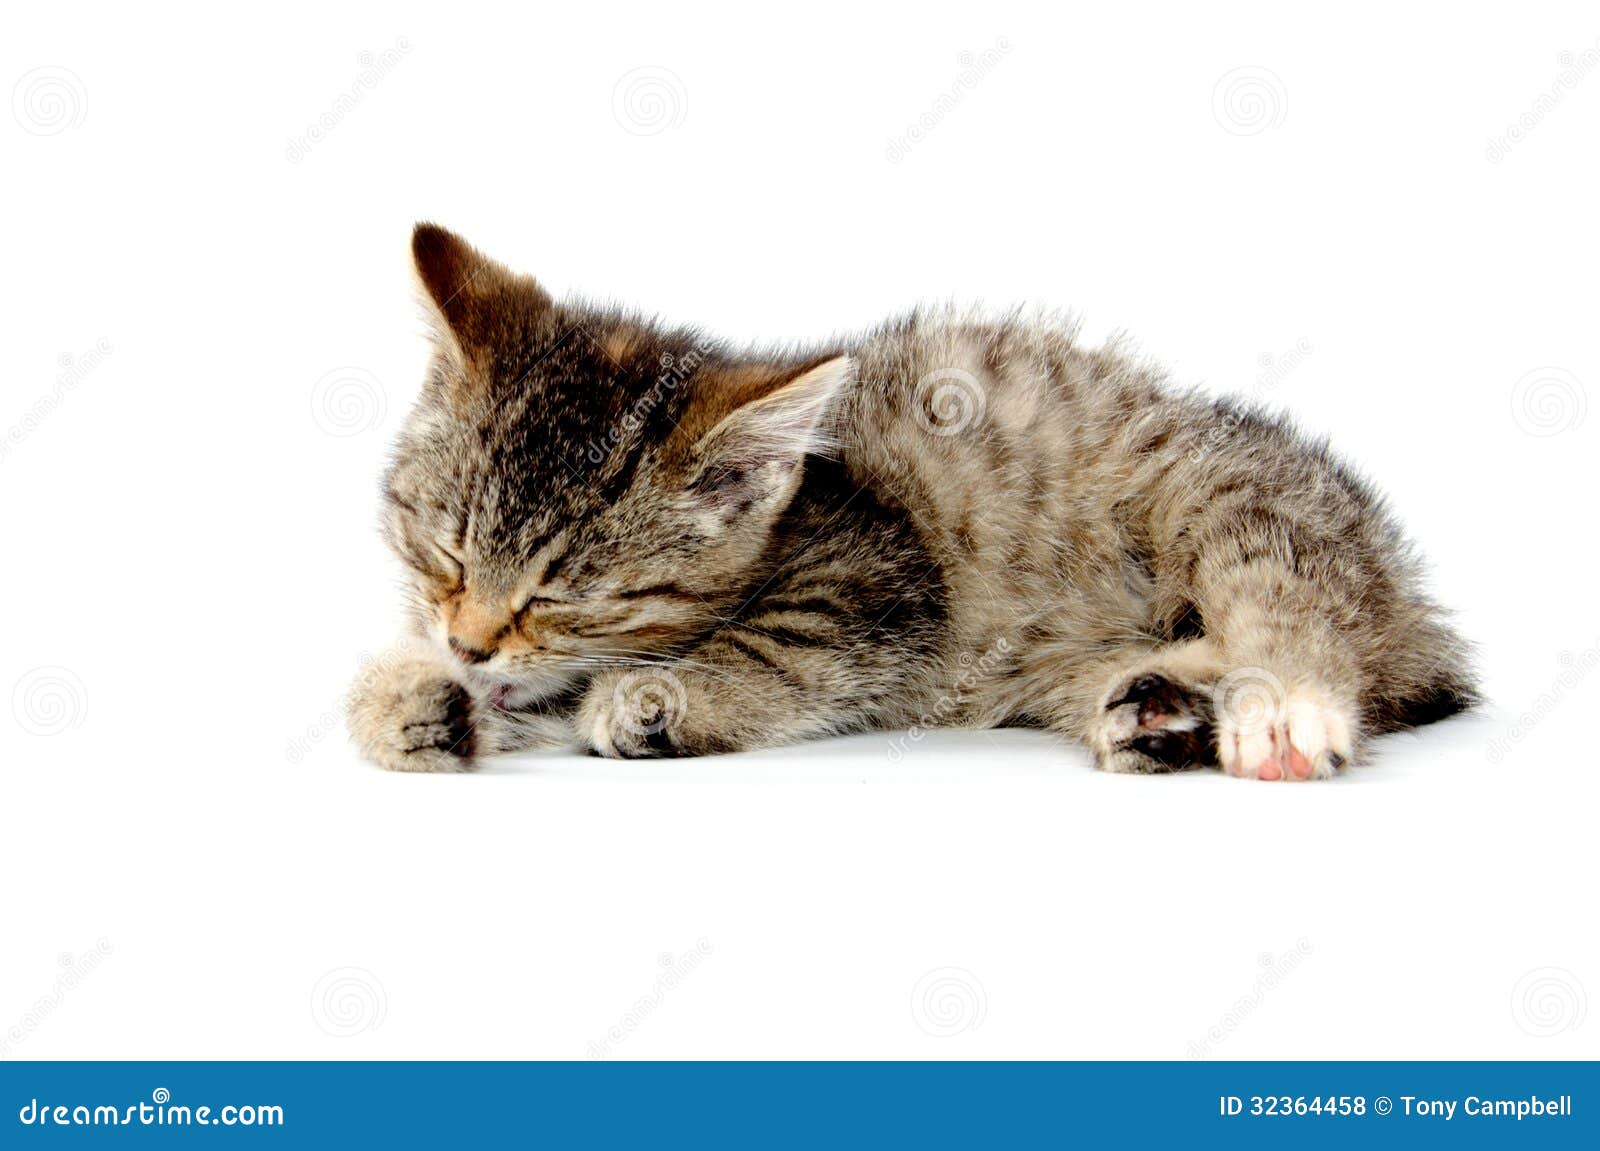 CUTE TABBY TAKING BATH BABY CAT LAYING DOWN WHITE BACKGROUND 32364458